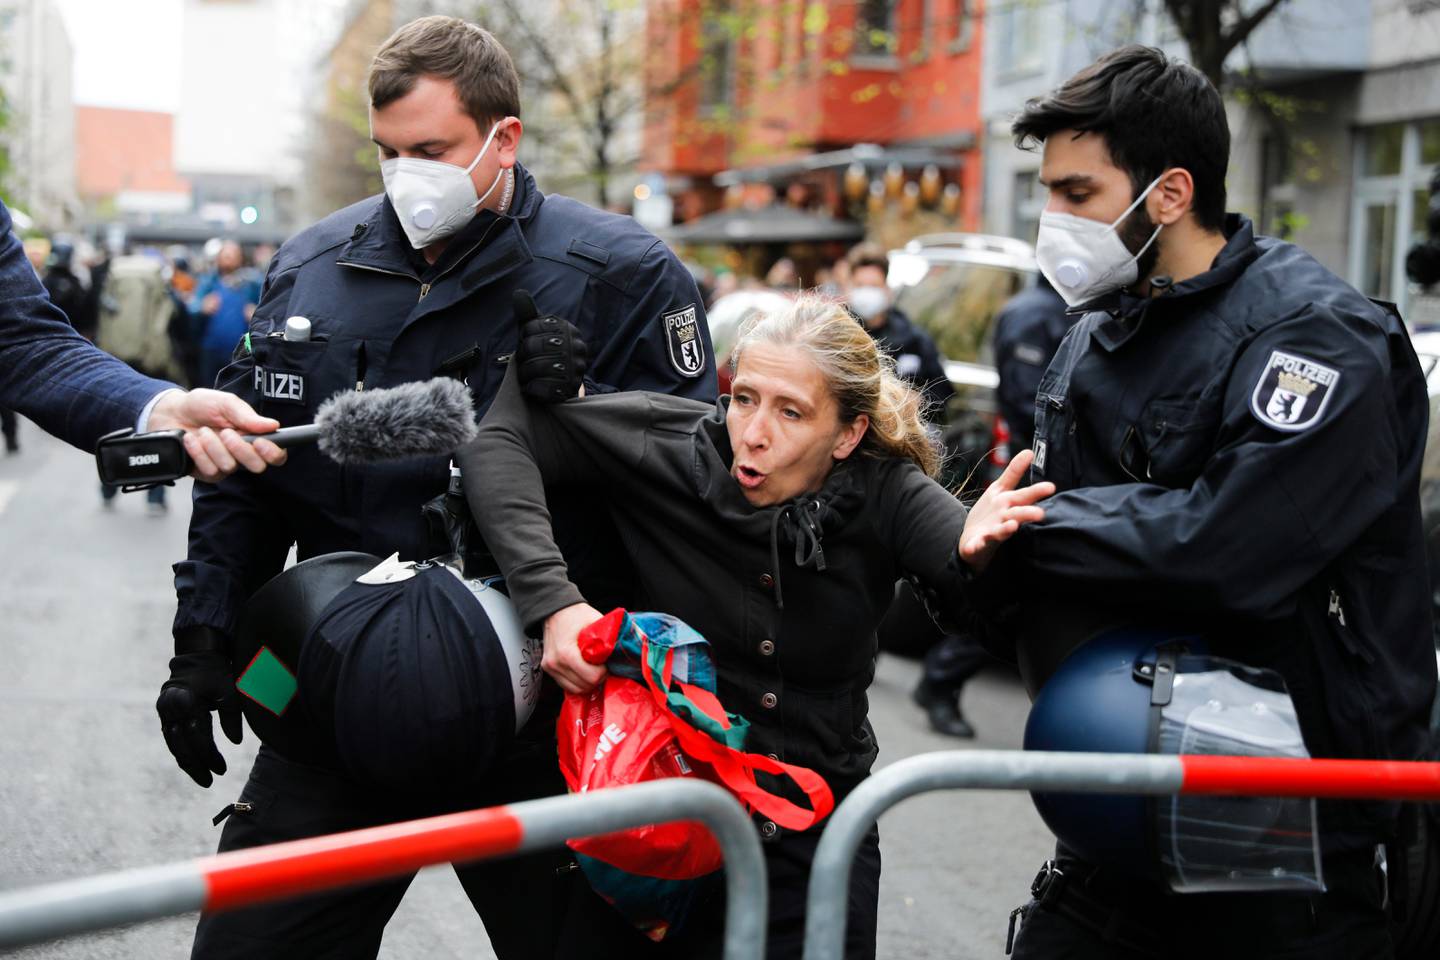 A woman talks to a reporter as she is detain by police officers during an illegal demonstration against the restrictions and measures to prevent the spread of coronavirus in Berlin, Germany, Saturday, April 25, 2020. (AP Photo/Markus Schreiber)